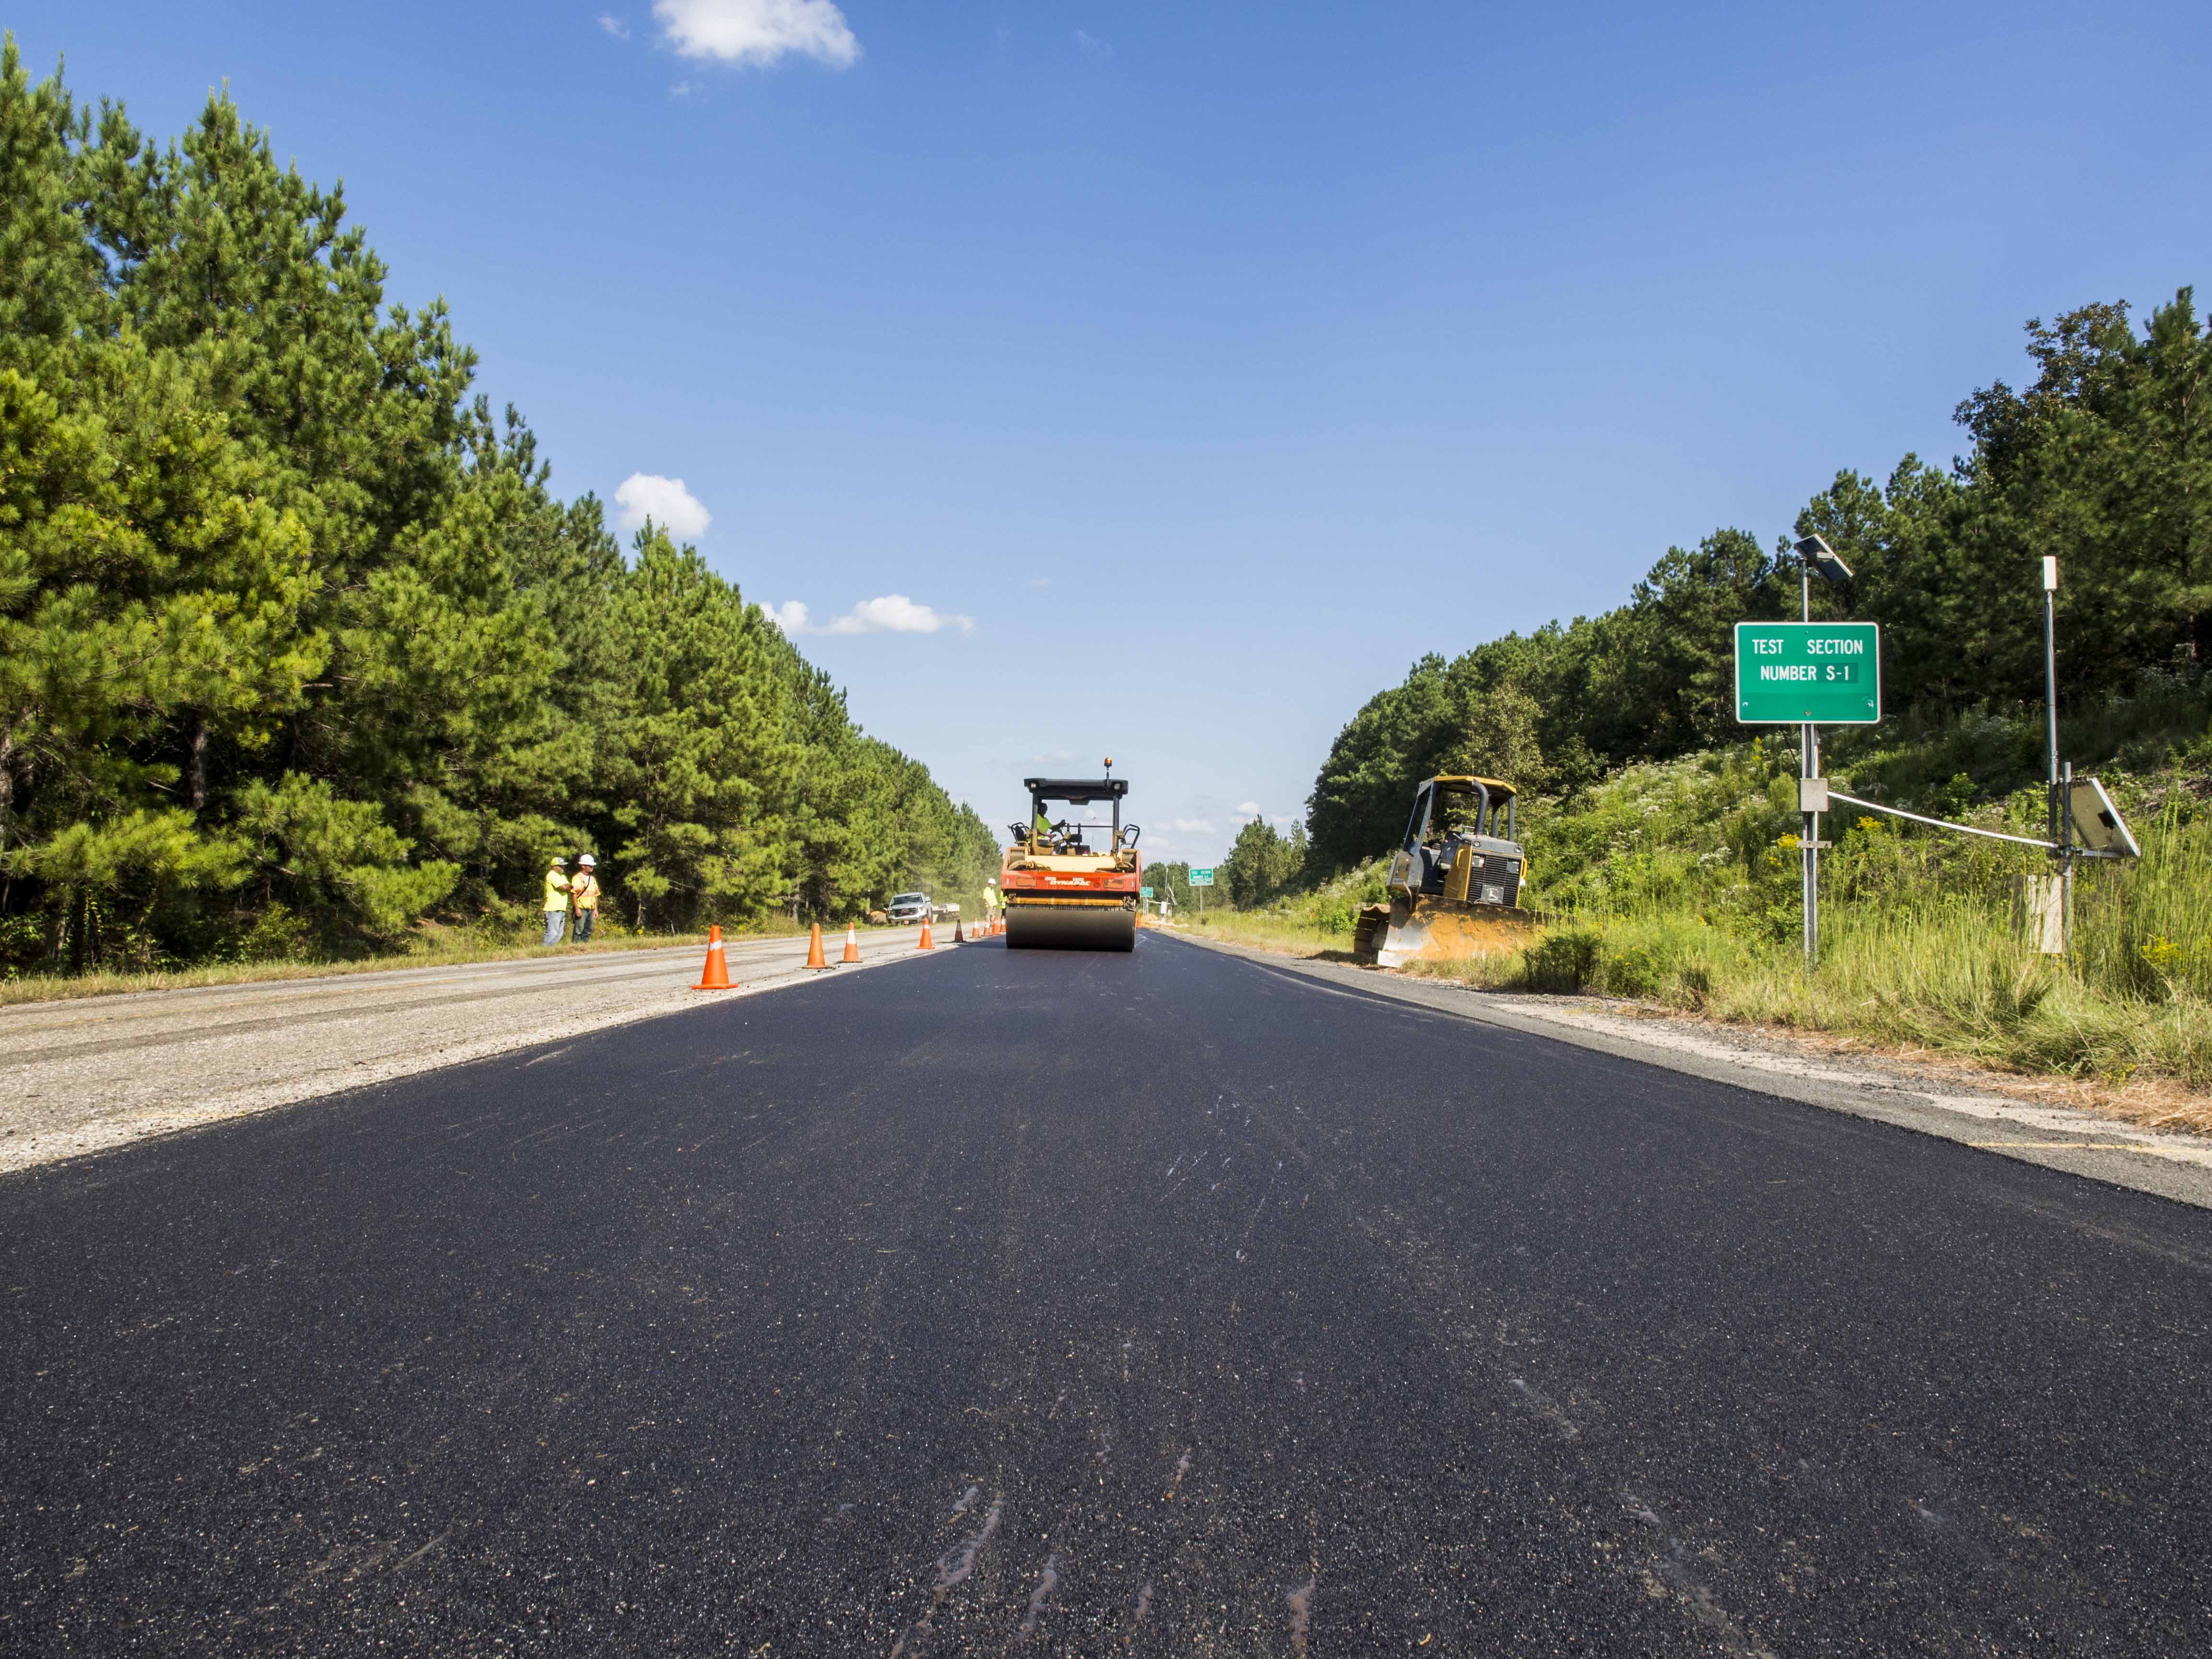 NCAT Test Track Section S1, sponsored by Oklahoma, will be used to evaluate the field performance of asphalt mixes designed using a balanced mix design approach.